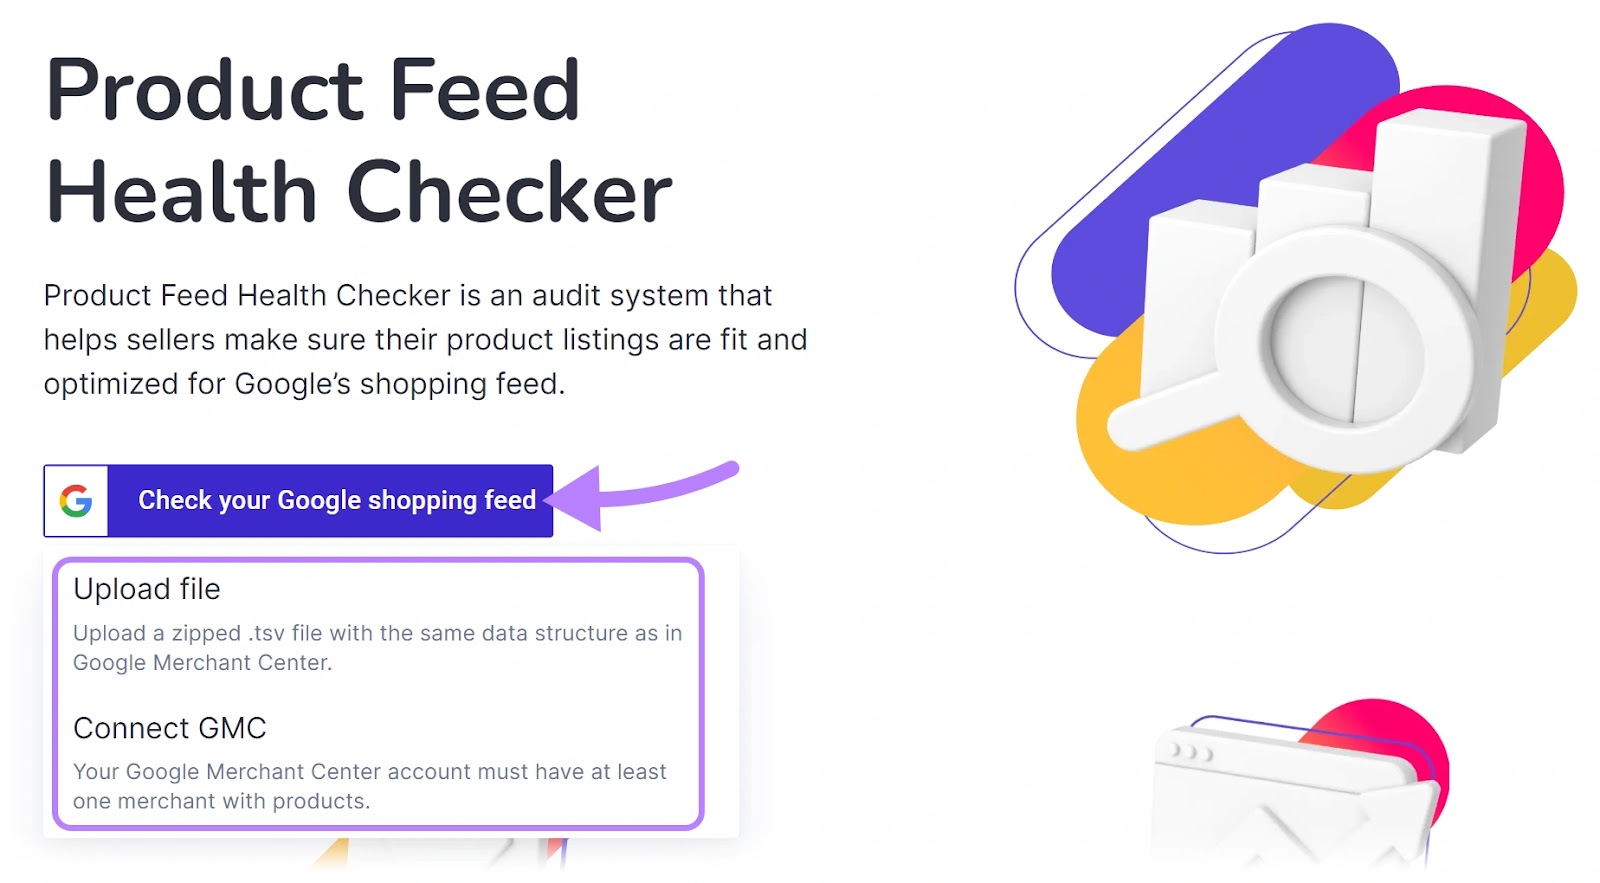 "Check your Google shopping feed" button in Product Feed Health Checker